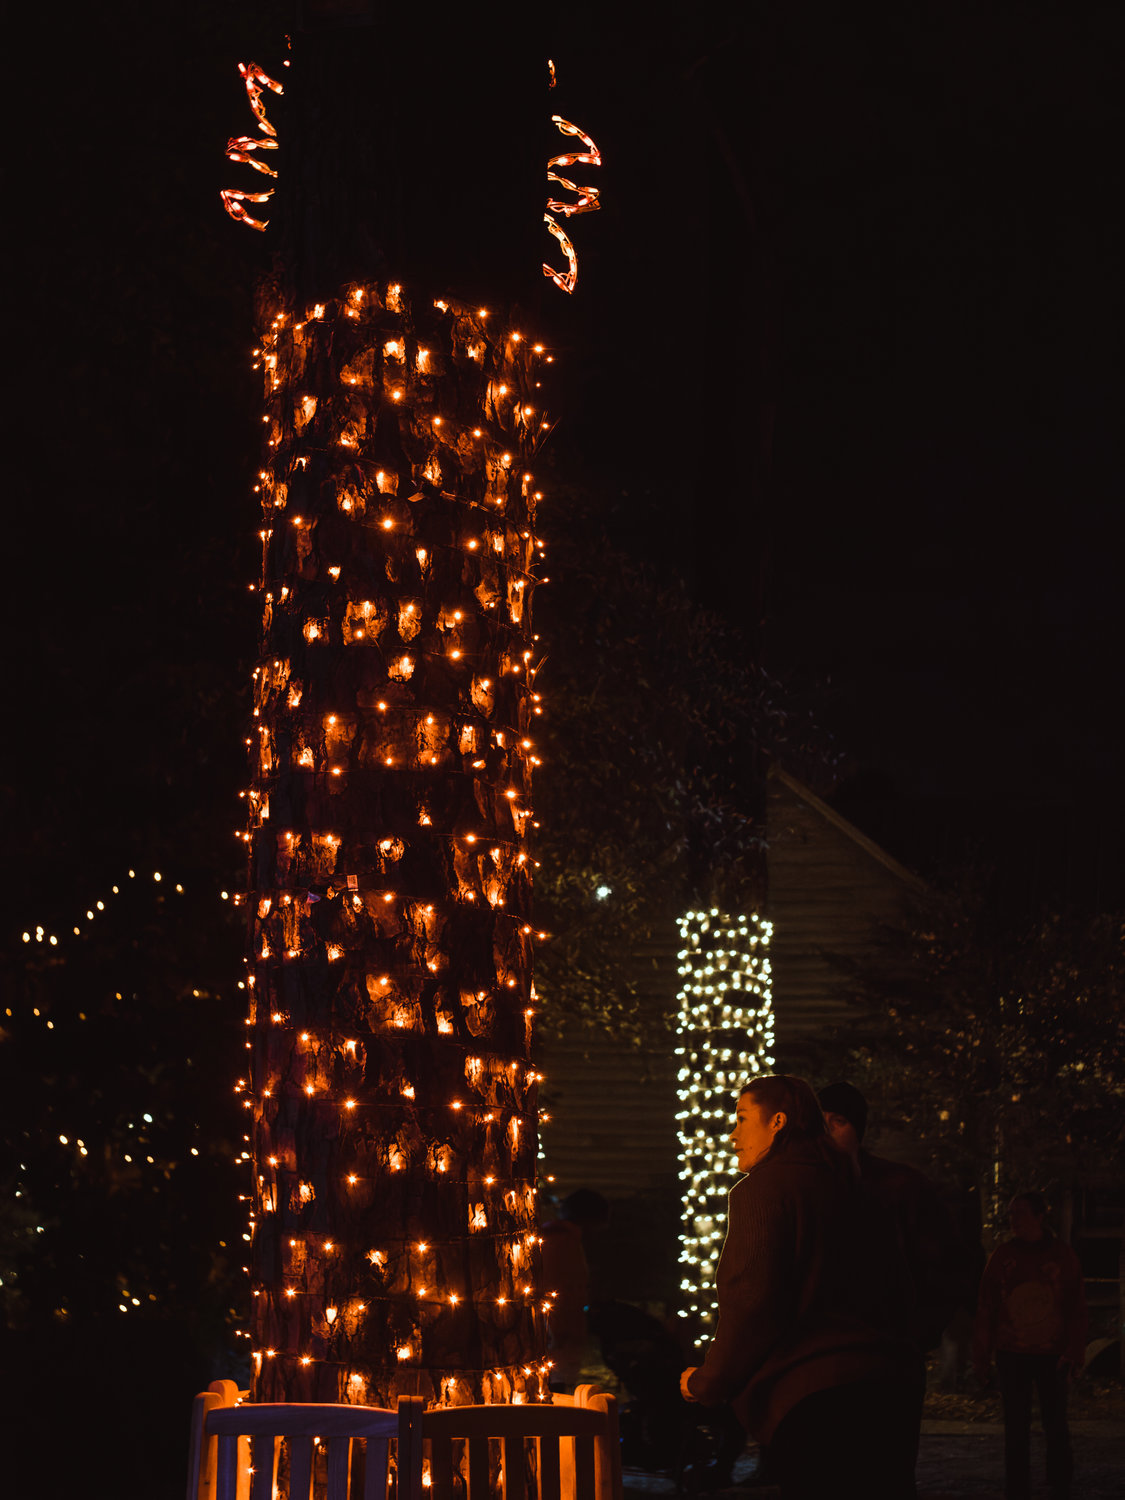 Cape Fear Botanical Garden presented its Holiday Lights in the Garden on select nights from Dec. 1-22.